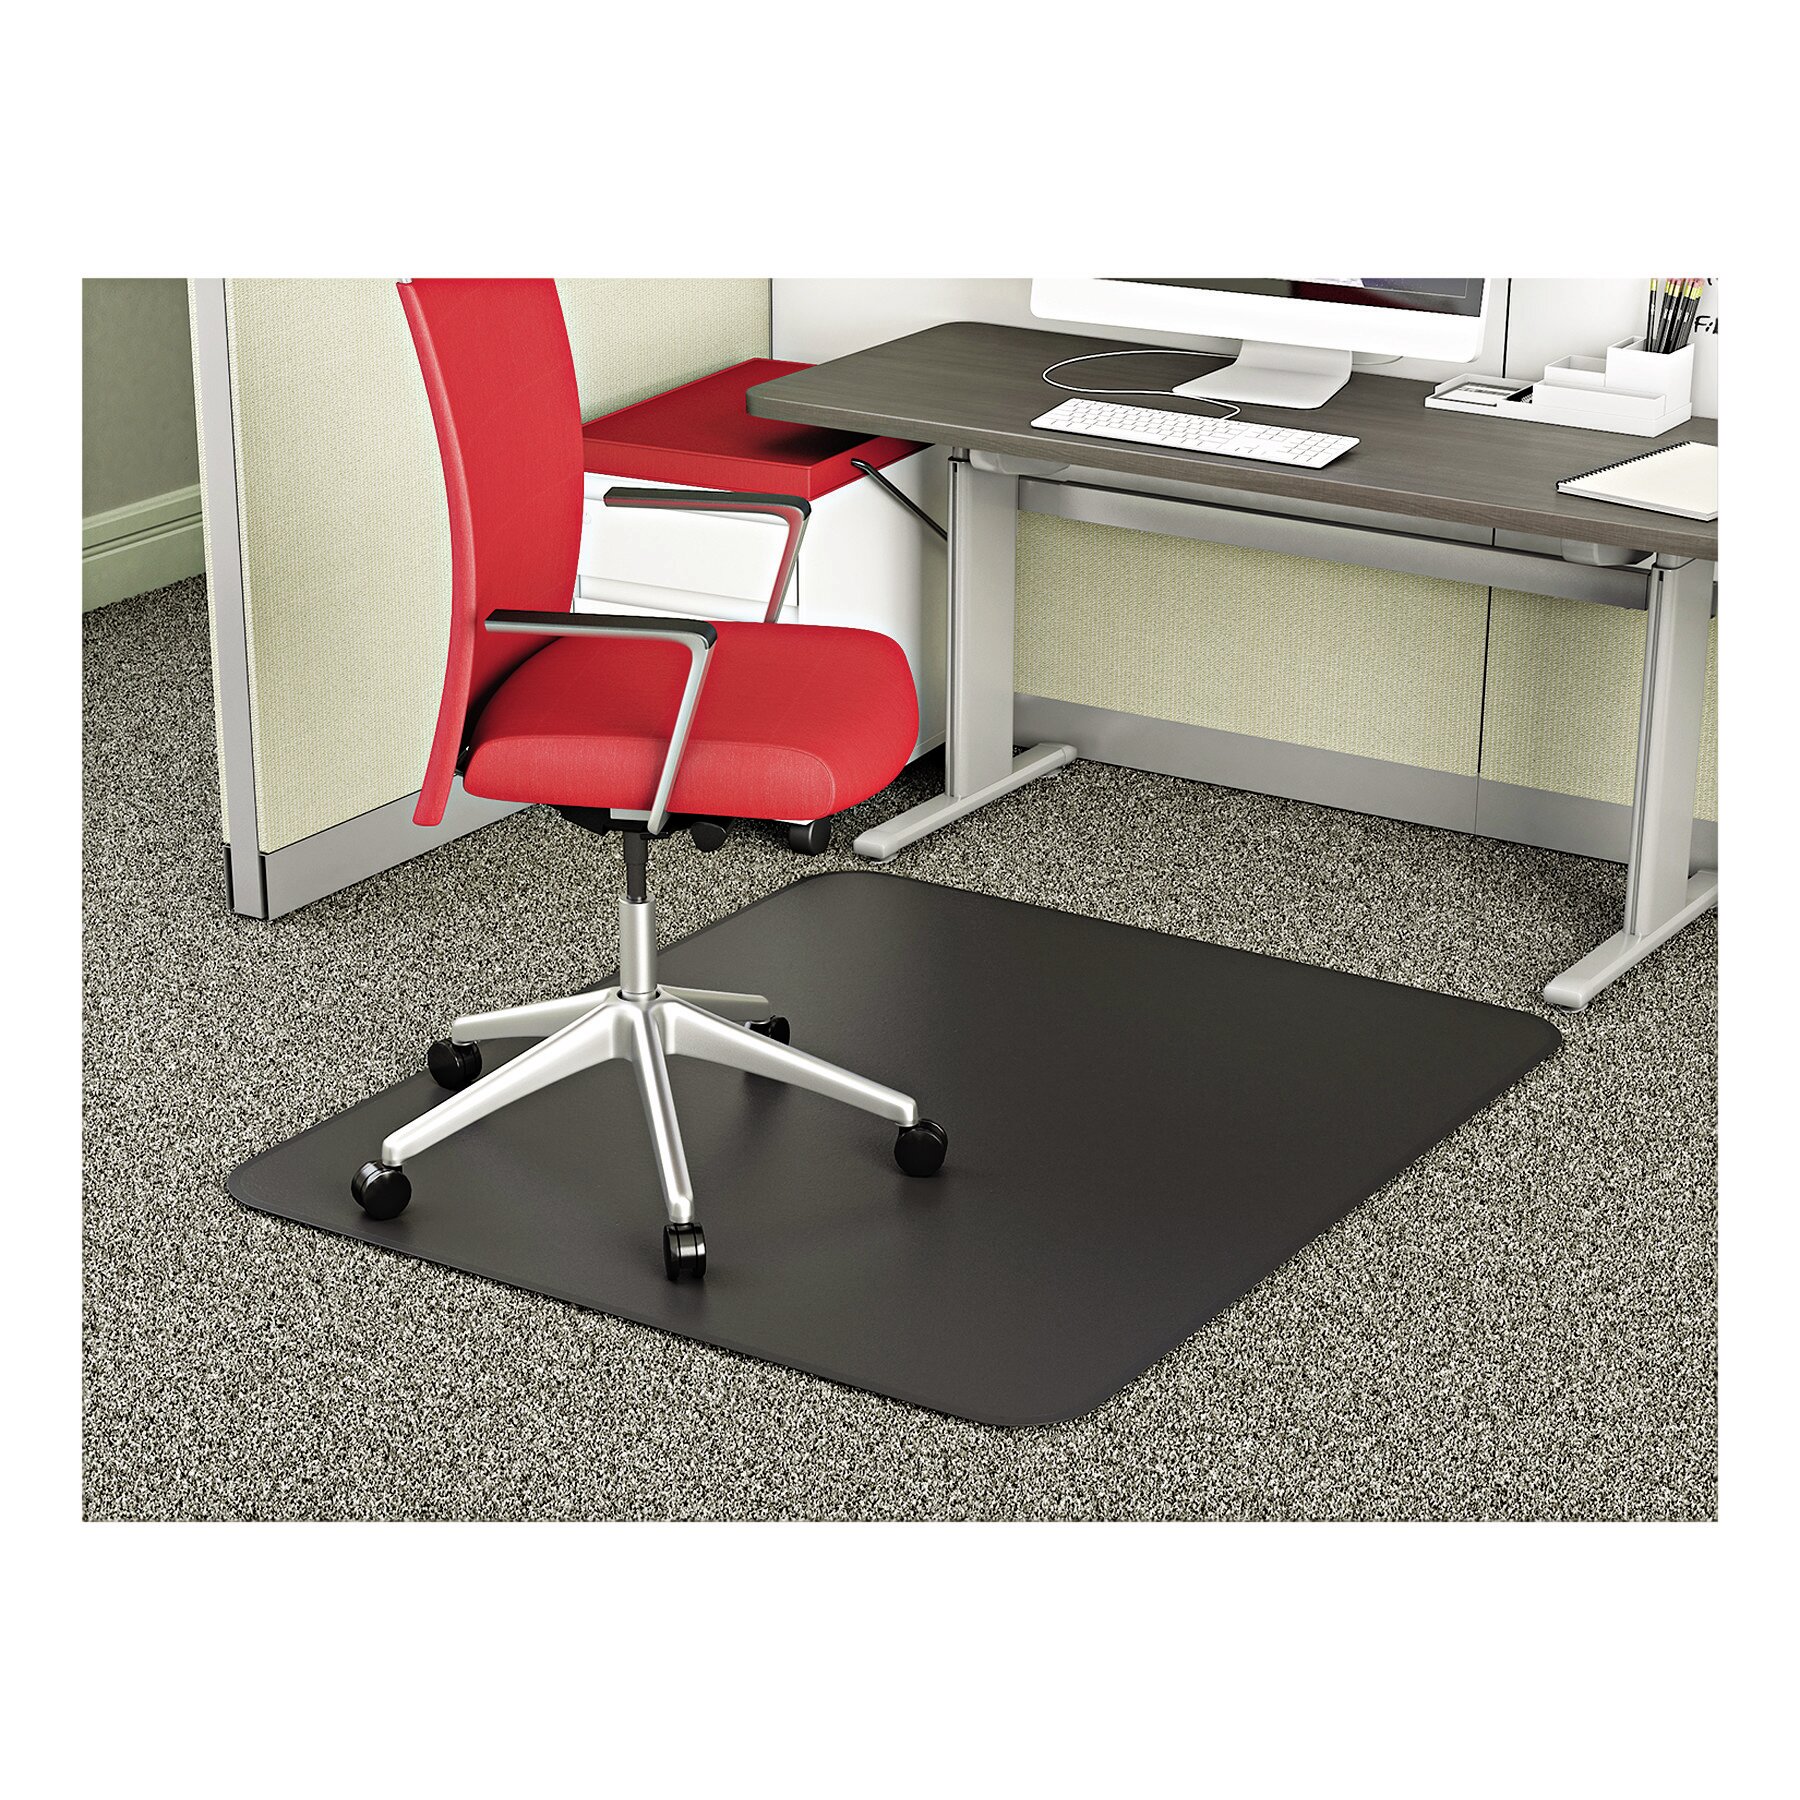 Dimex 36 in x 48 in Black Plastic Chair Mat with Lip for Hard Floors and Low Pile Carpets